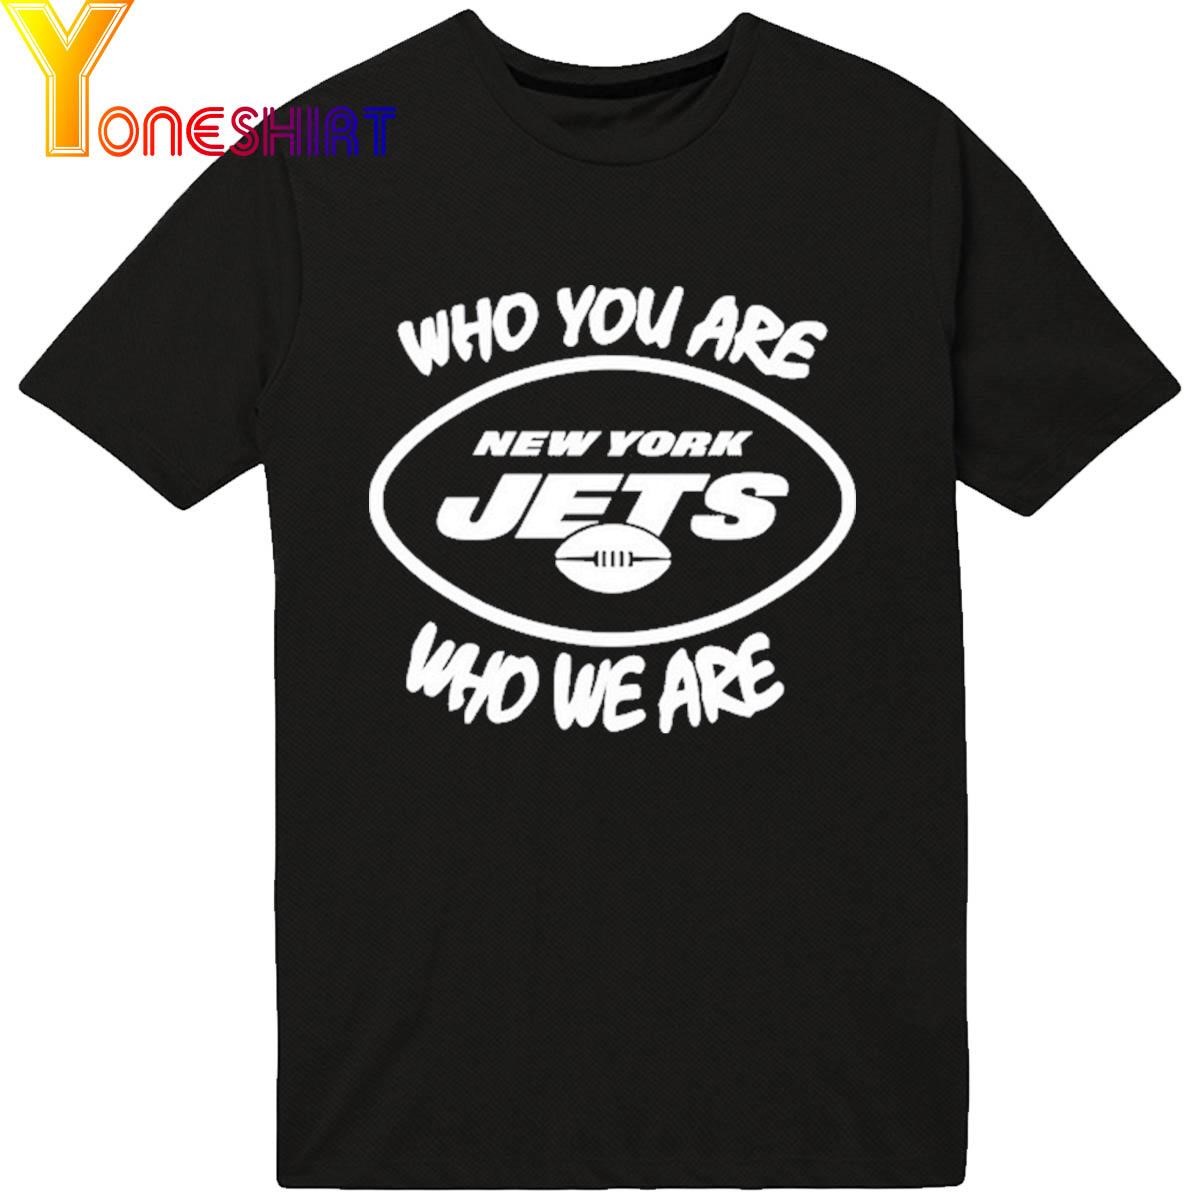 Who You Are Who We Are shirt